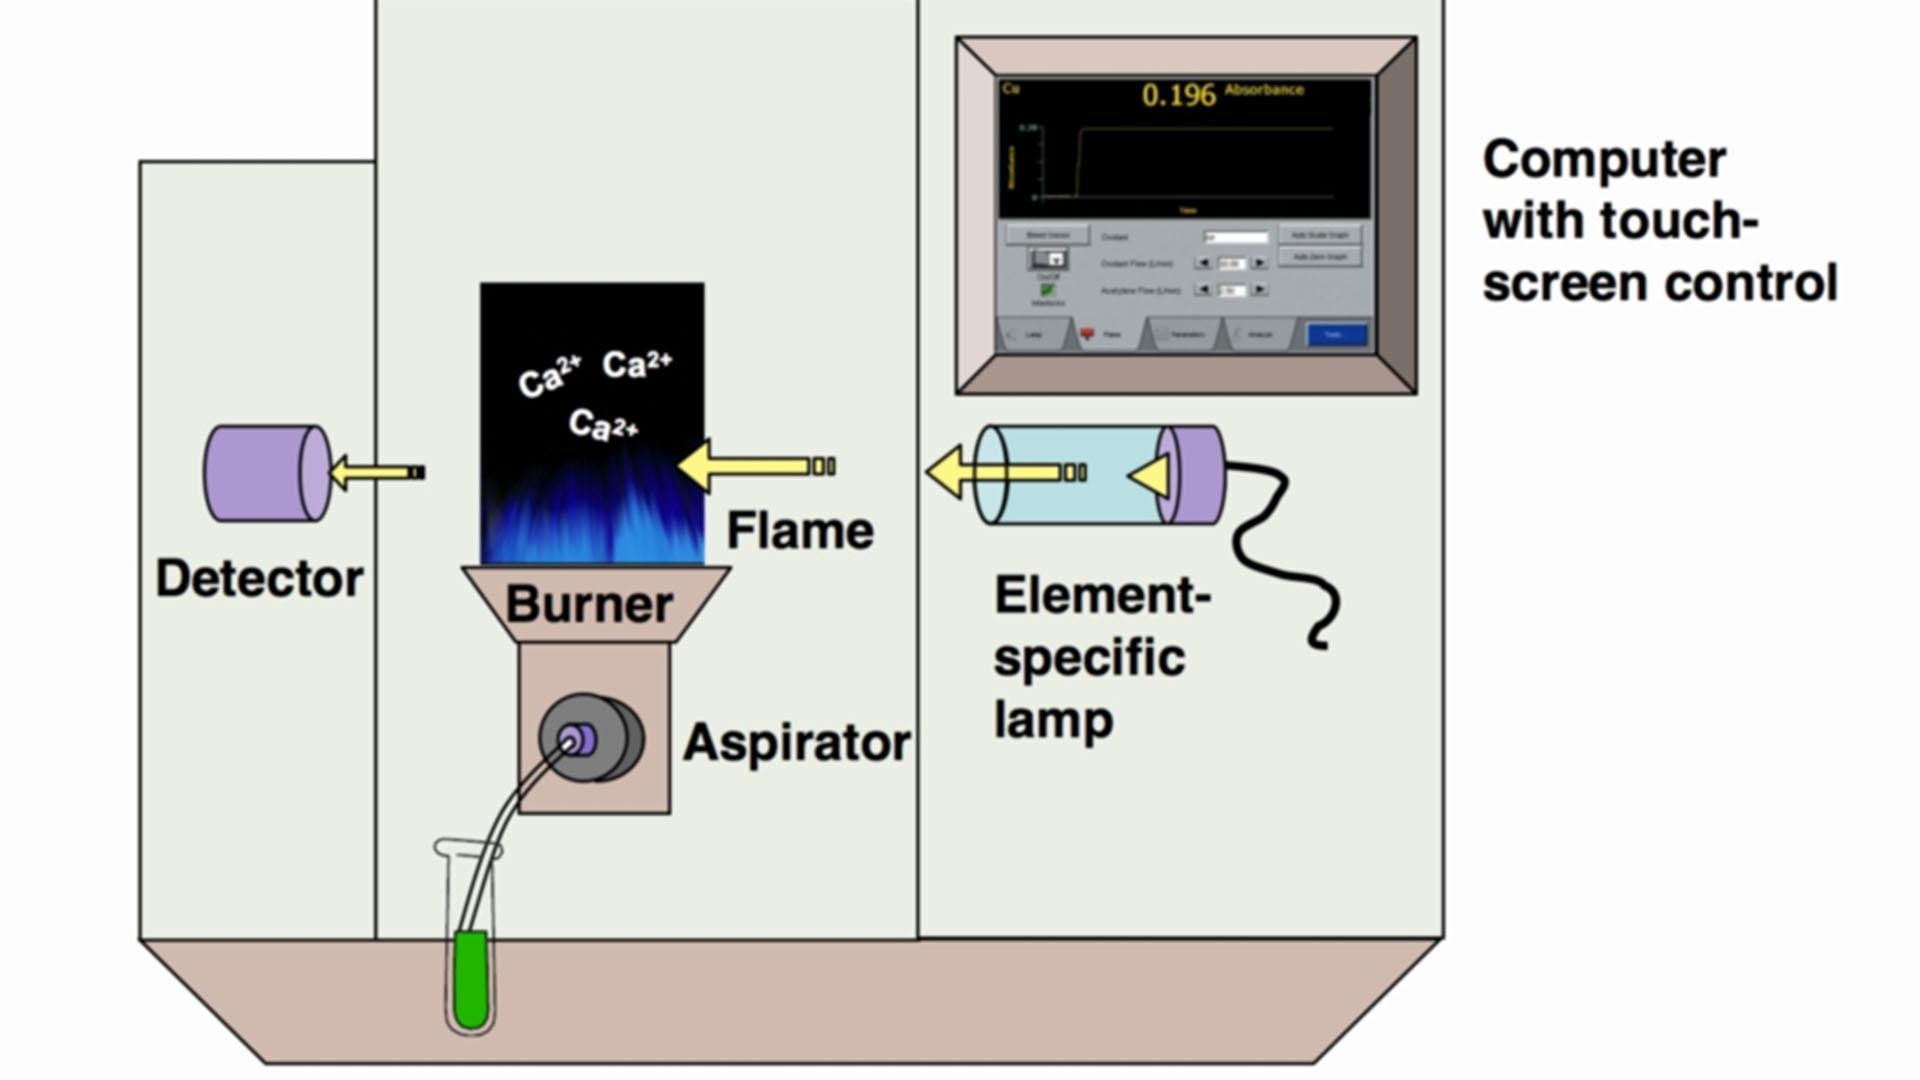 Schematic showing “computer with touchscreen control,” “element-specific lamp,” “burner,” “flame,” “aspirator,” and “detector.”